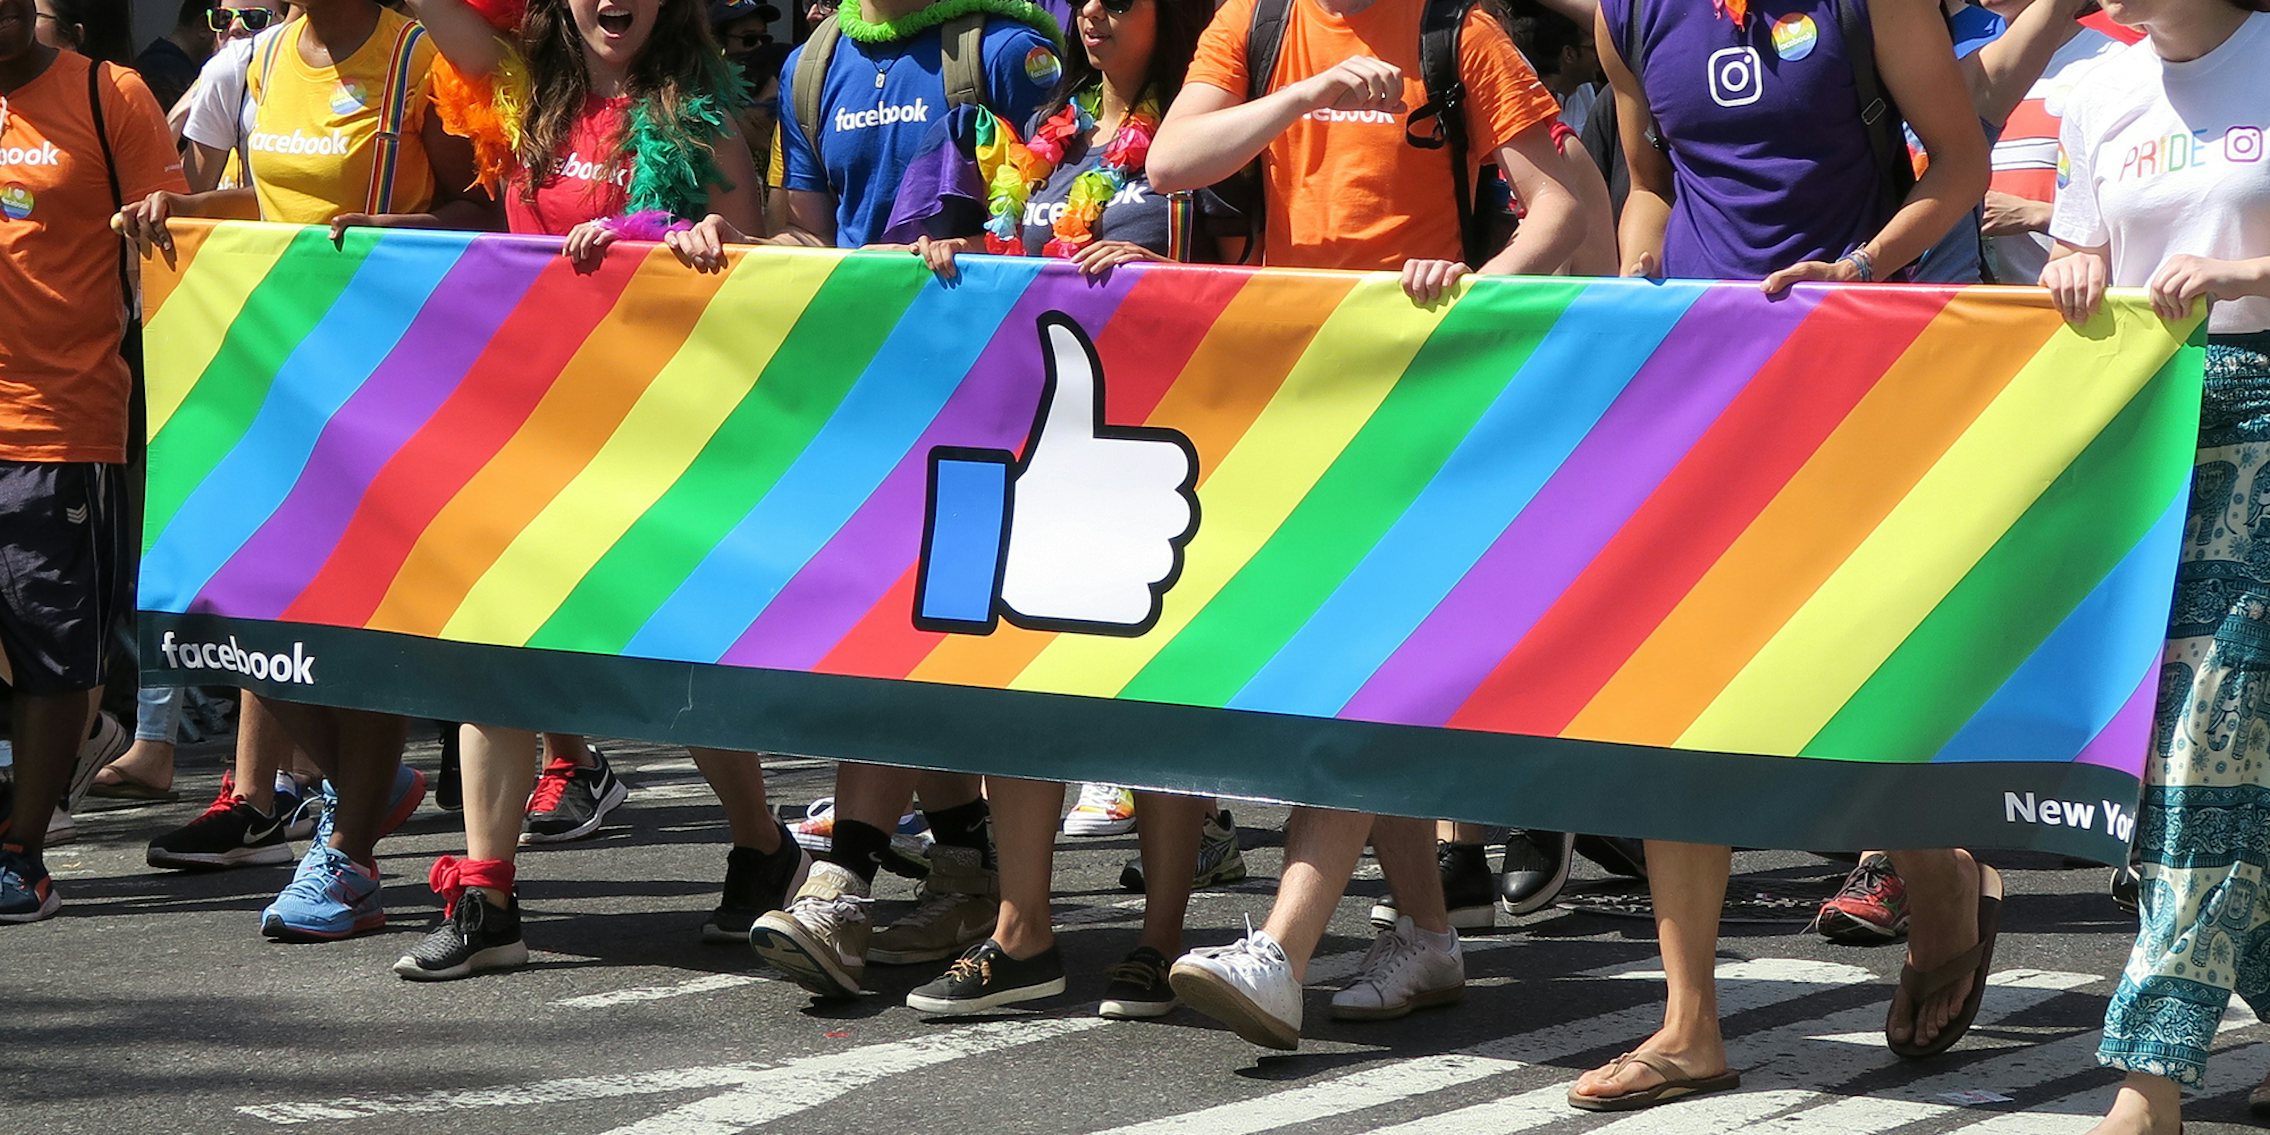 Group of people in the Gay Pride Parade behind a rainbow colored banner with the Facebook logo on it.